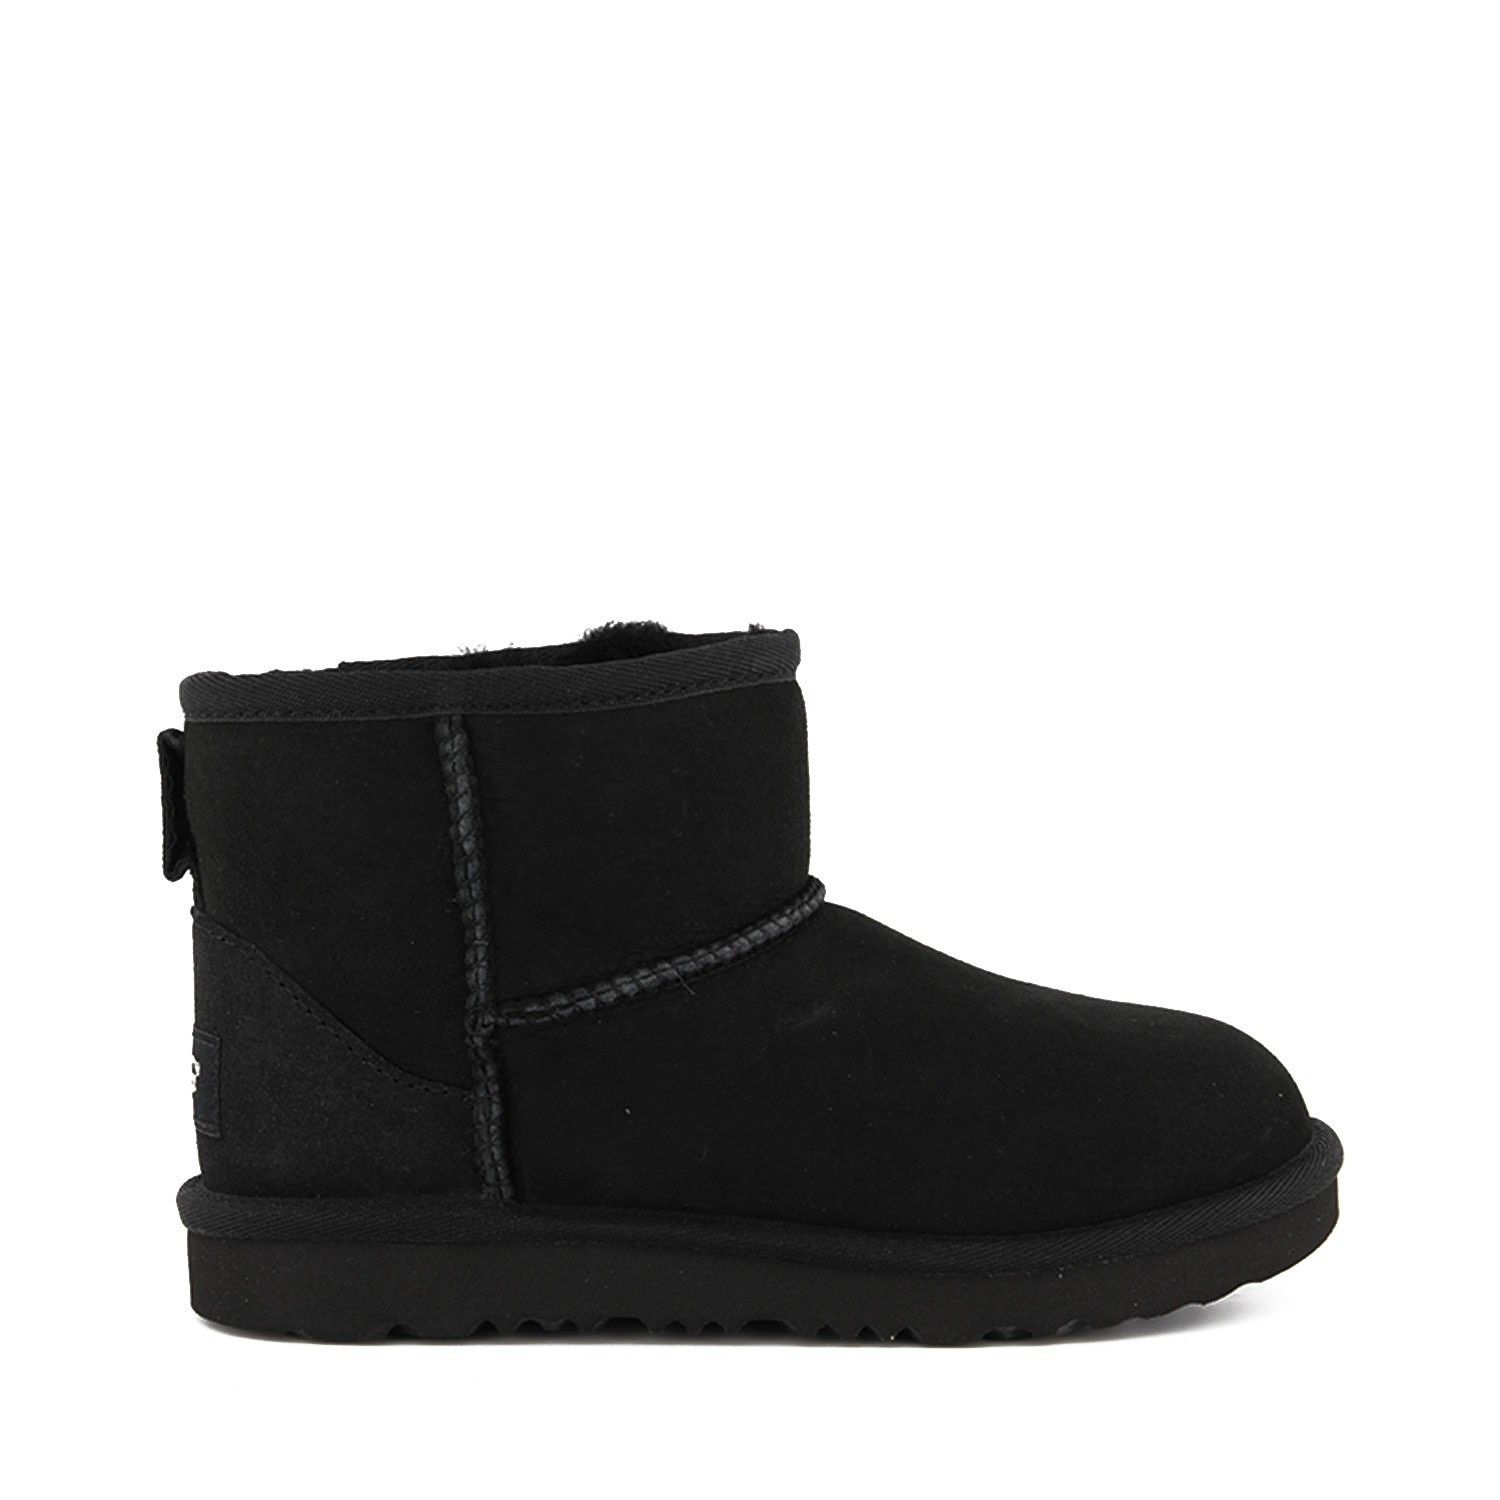 Picture of Ugg 1017715 kids boots black